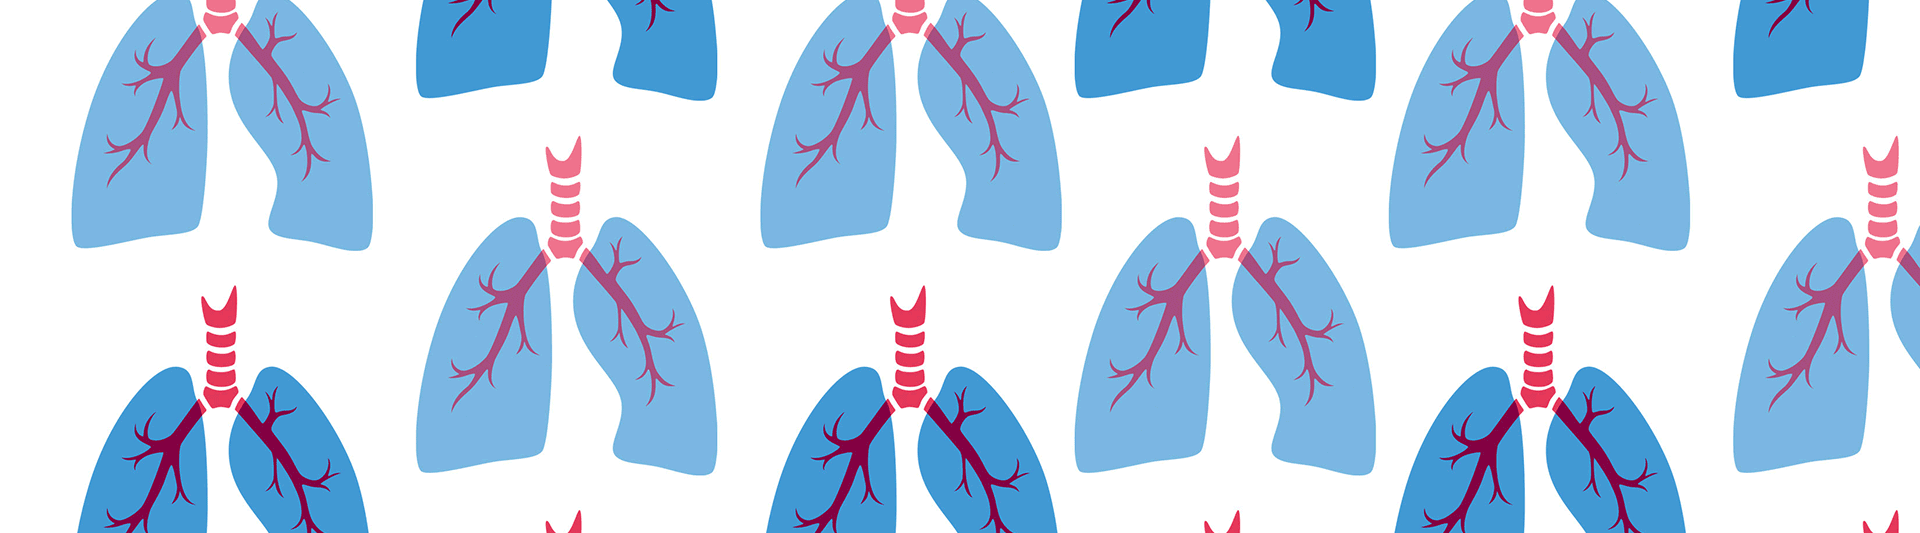 Early Diagnosis and Innovative Management of Lung Cancer, Webinar Recording